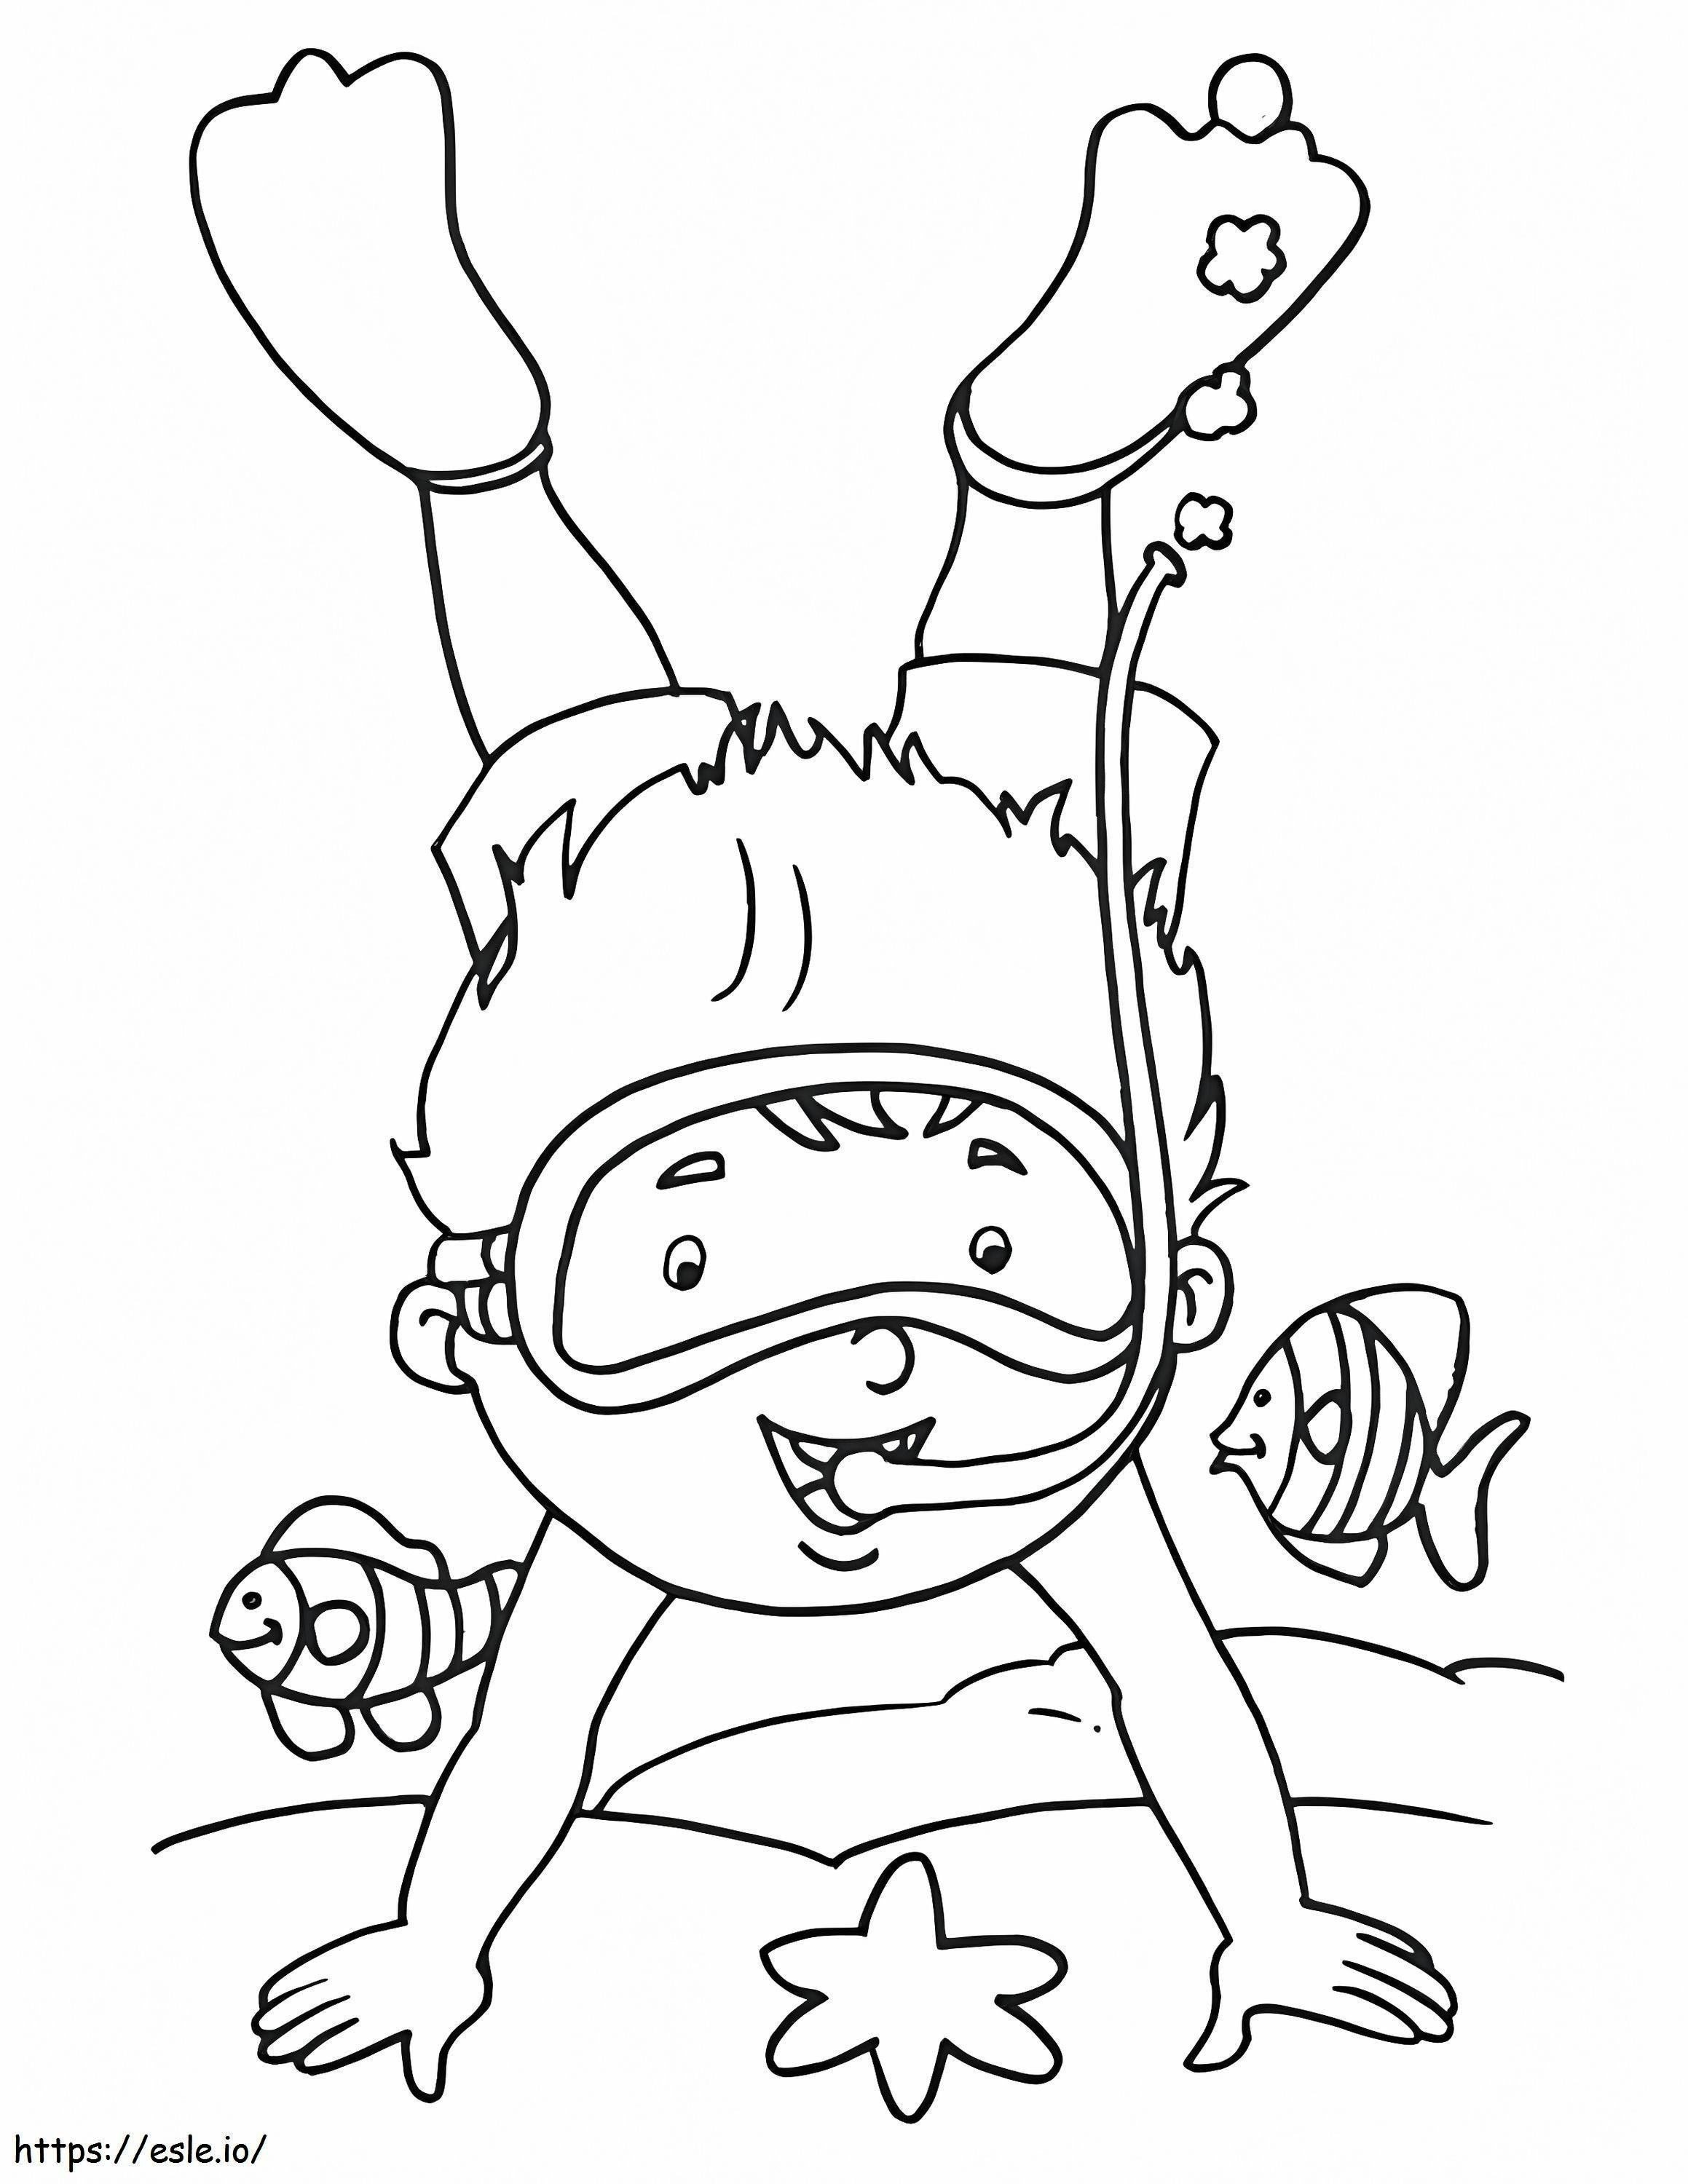 Diver With Fish And Starfish coloring page